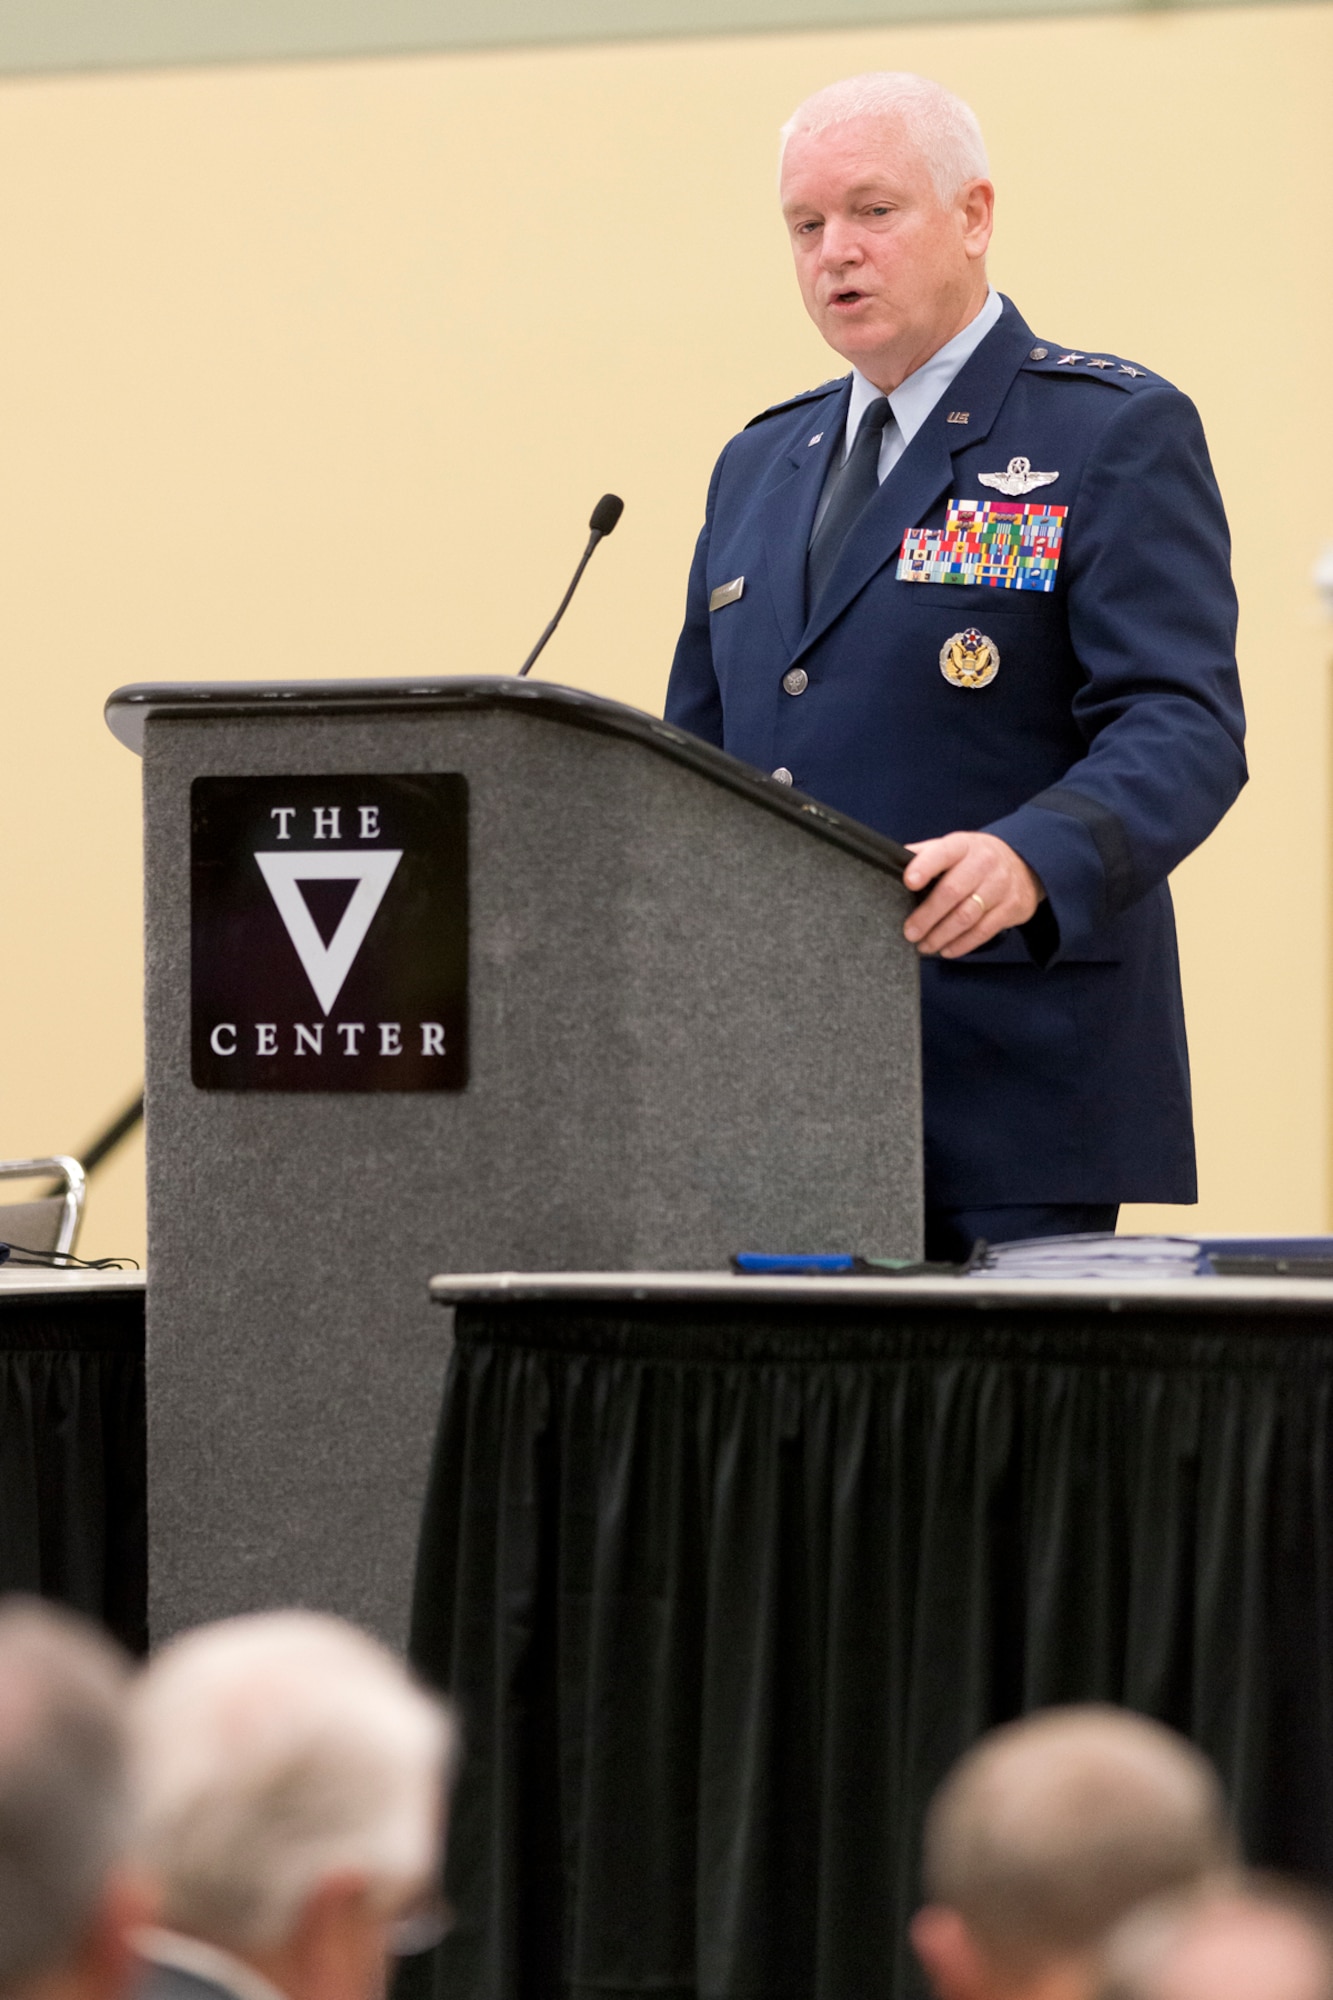 Lt. General L. Scott Rice, director of the Air National Guard, addresses an audience during the annual conference for the National Guard Association of the United States in Baltimore, Maryland, September 12, 2016. The NGAUS is the nation’s oldest military association, lobbies solely for the benefit of the Guardsmen and educates the public about the National Guard's role in the history of the armed forces. (U.S. Air National Guard photo by Master Sgt. Marvin R. Preston)